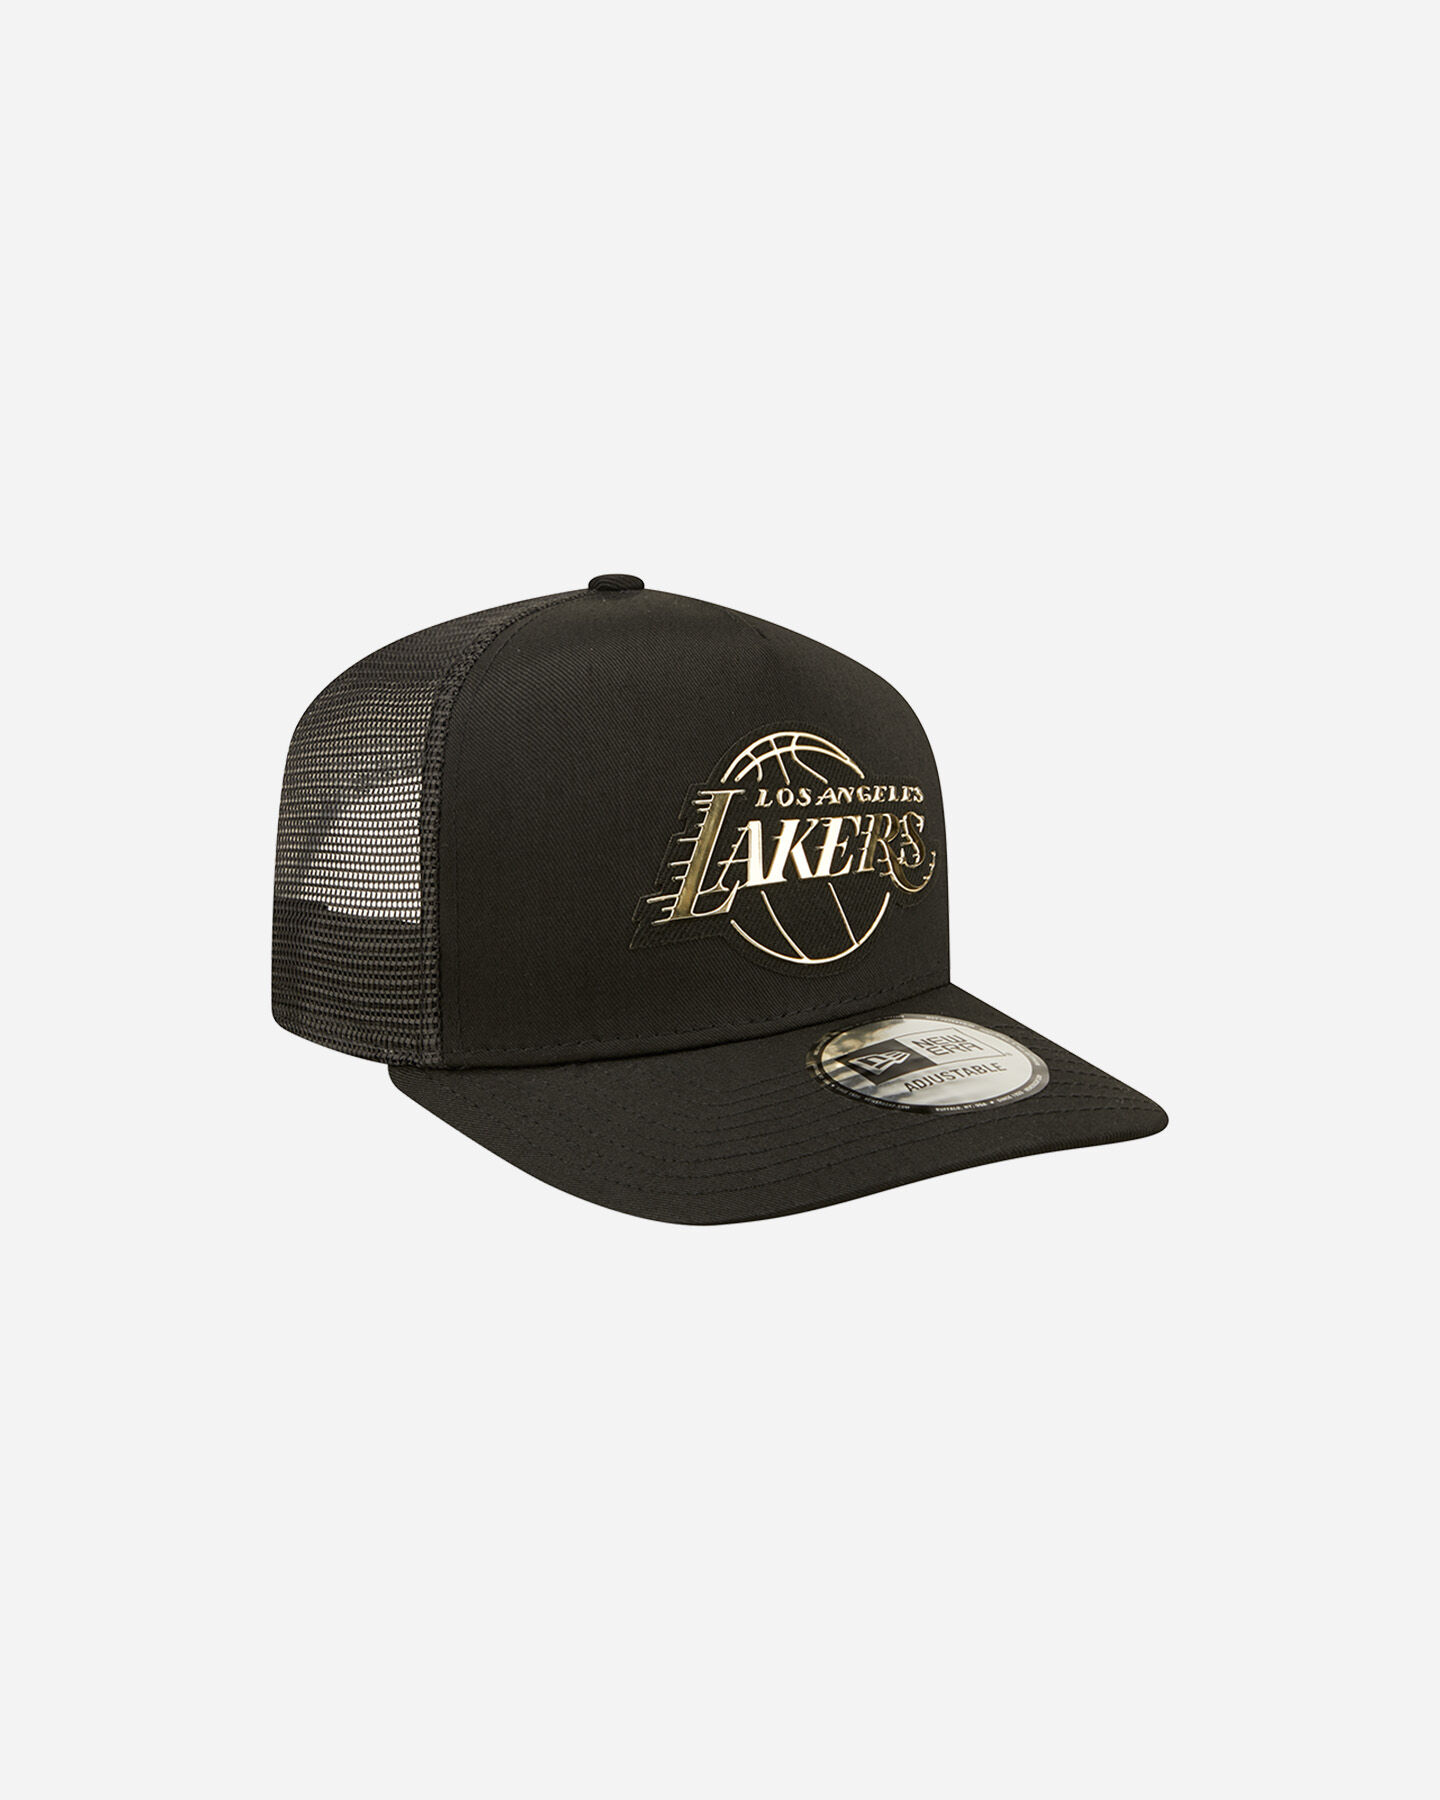  Cappellino NEW ERA 940 AF TRUCKER LOS ANGELES LAKERS  S5480994|001|OSFM scatto 2